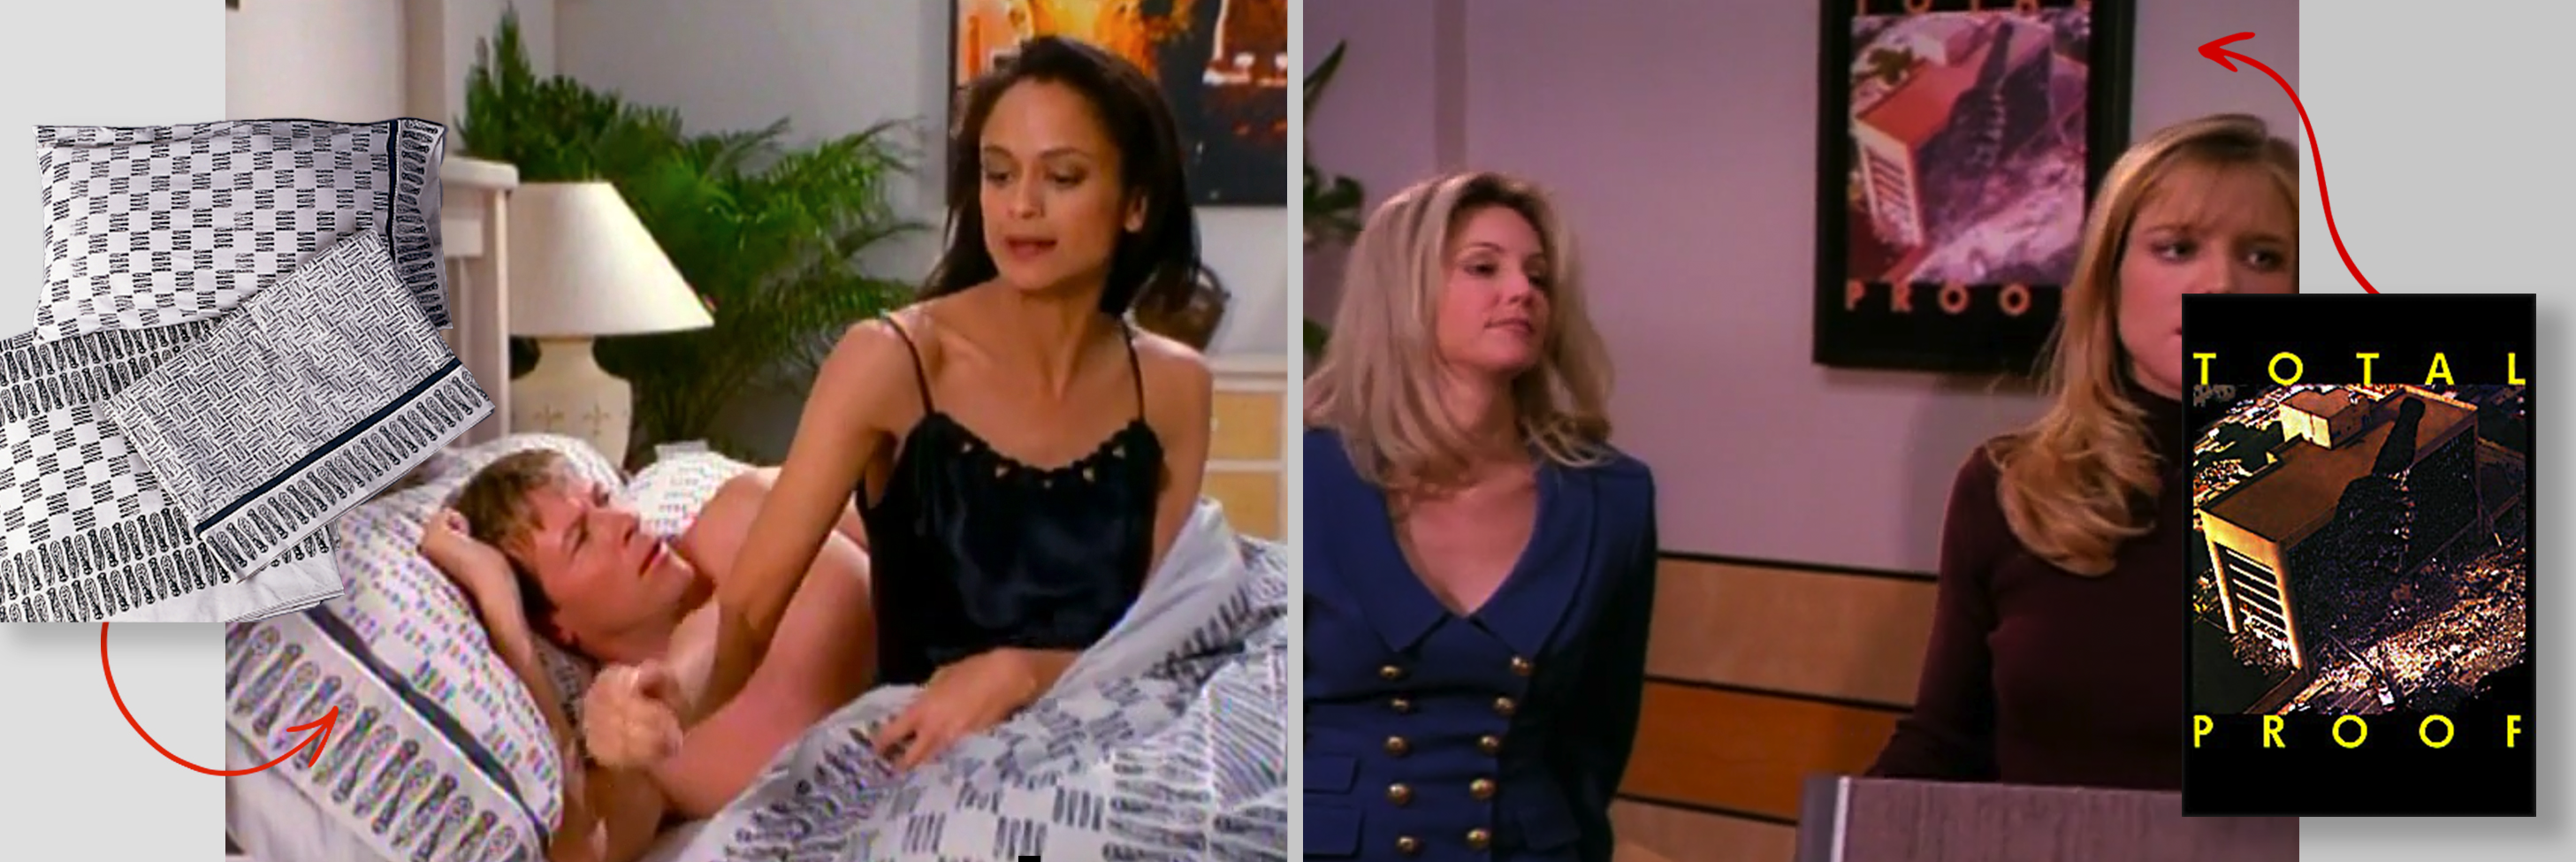 Left: A man and a woman on a TV show recline in a bed whose sheets portray unrolled condoms. Right: Two office workers on a TV show; on the wall behind them is a poster reading TOTAL PROOF and showing the results of the bombing in Oklahoma City.